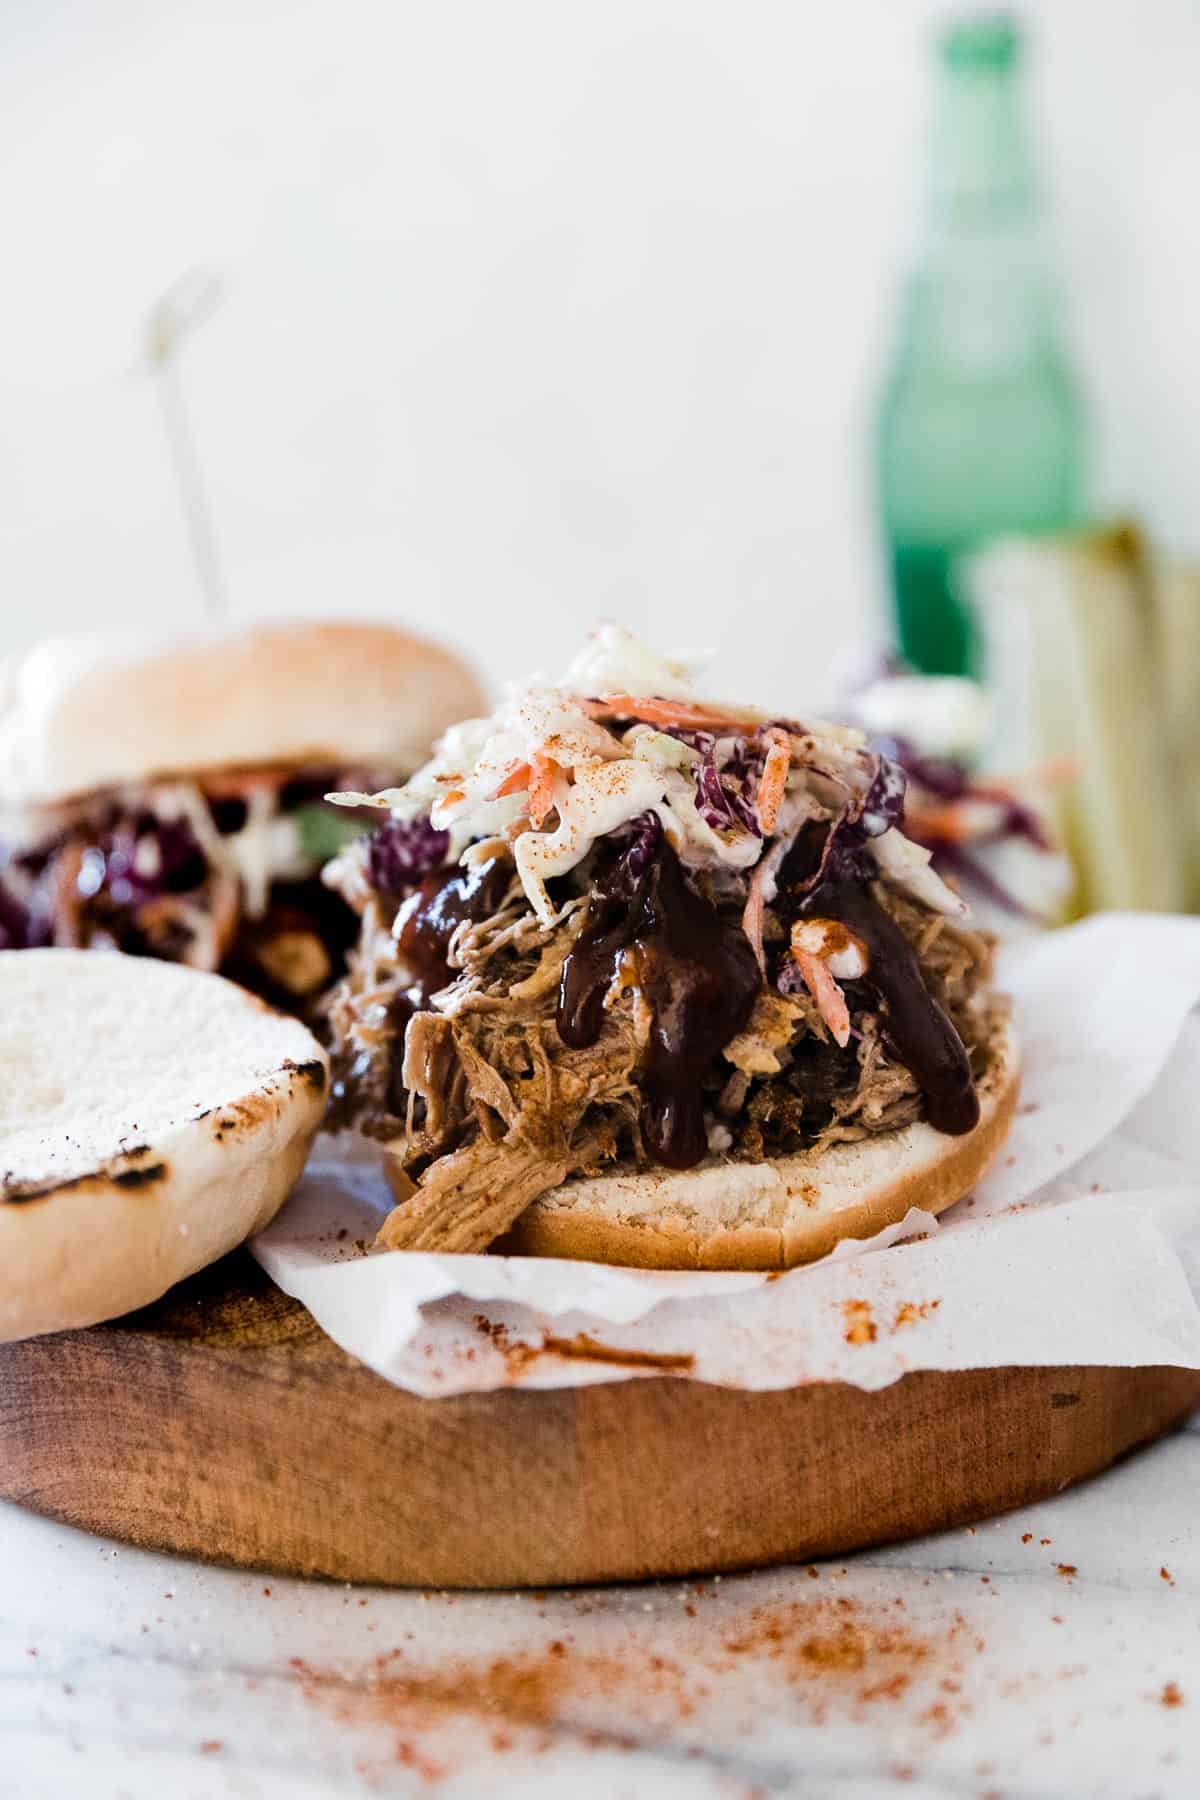 Pulled pork on a bun, topped with slaw and bbq sauce. There is a jar of pickles in the background.